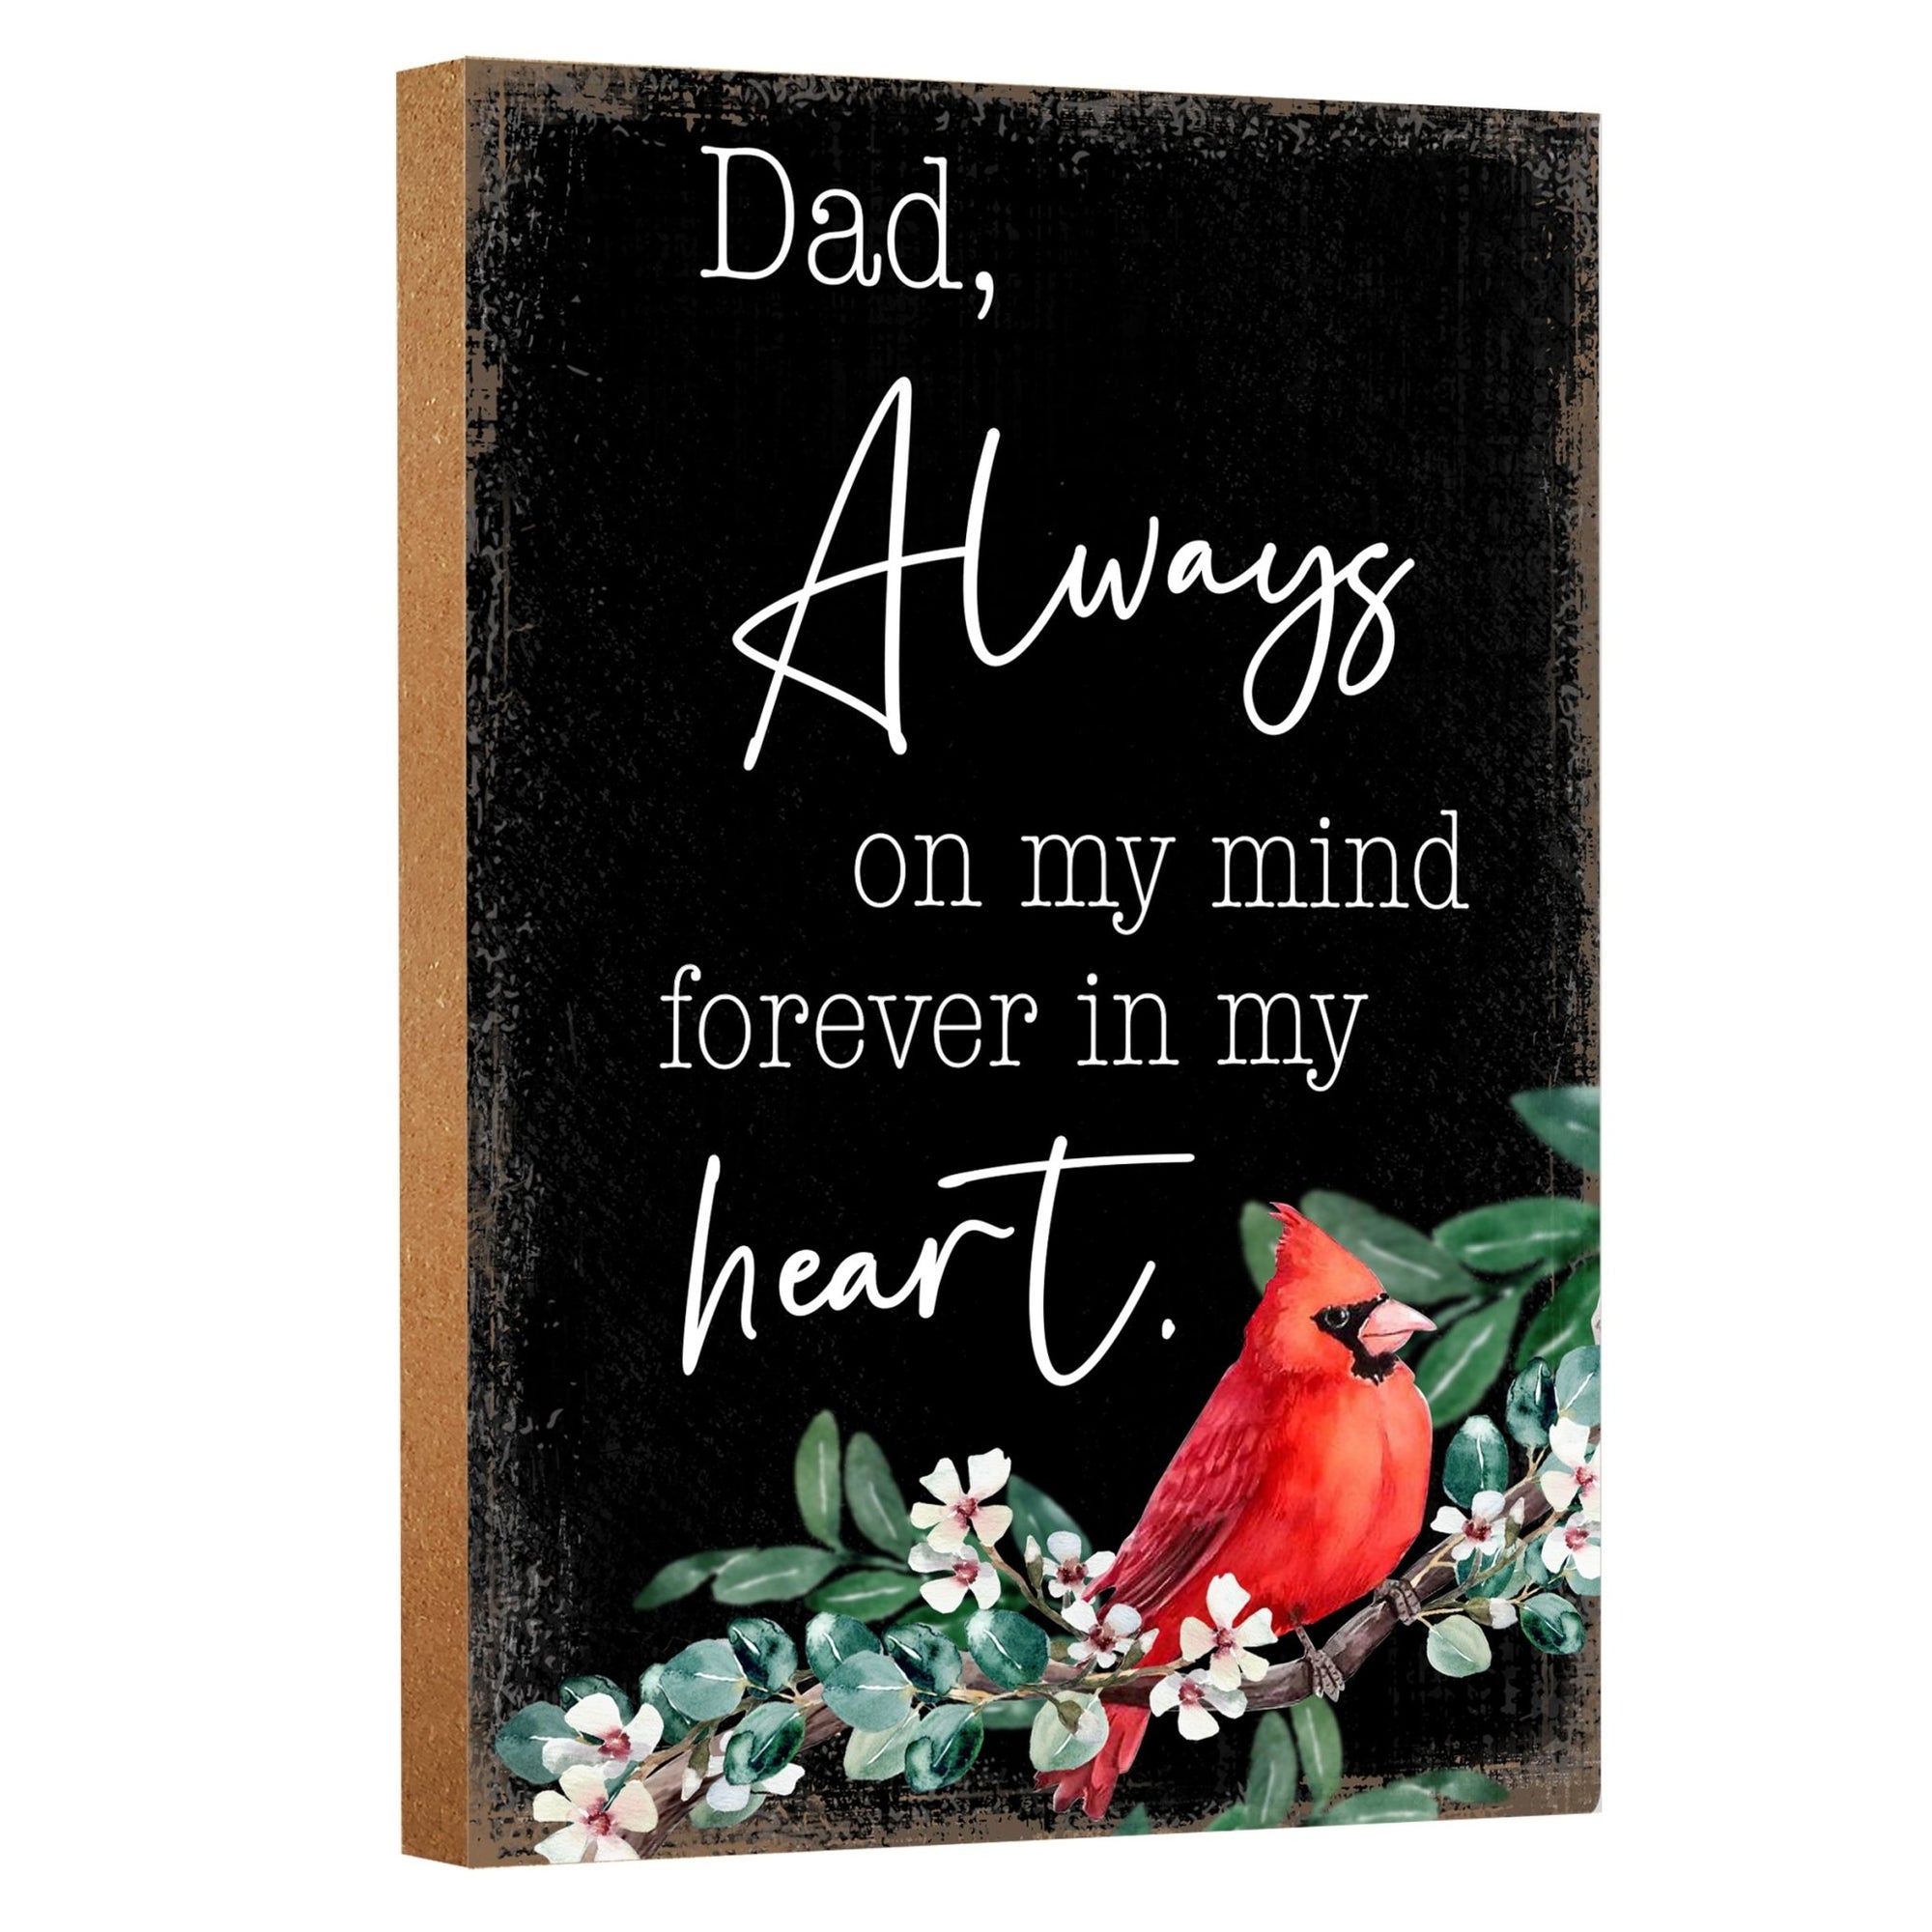 Wooden memorial shelf decor and tabletop memorial decorations to cherish the memory of a loved one.